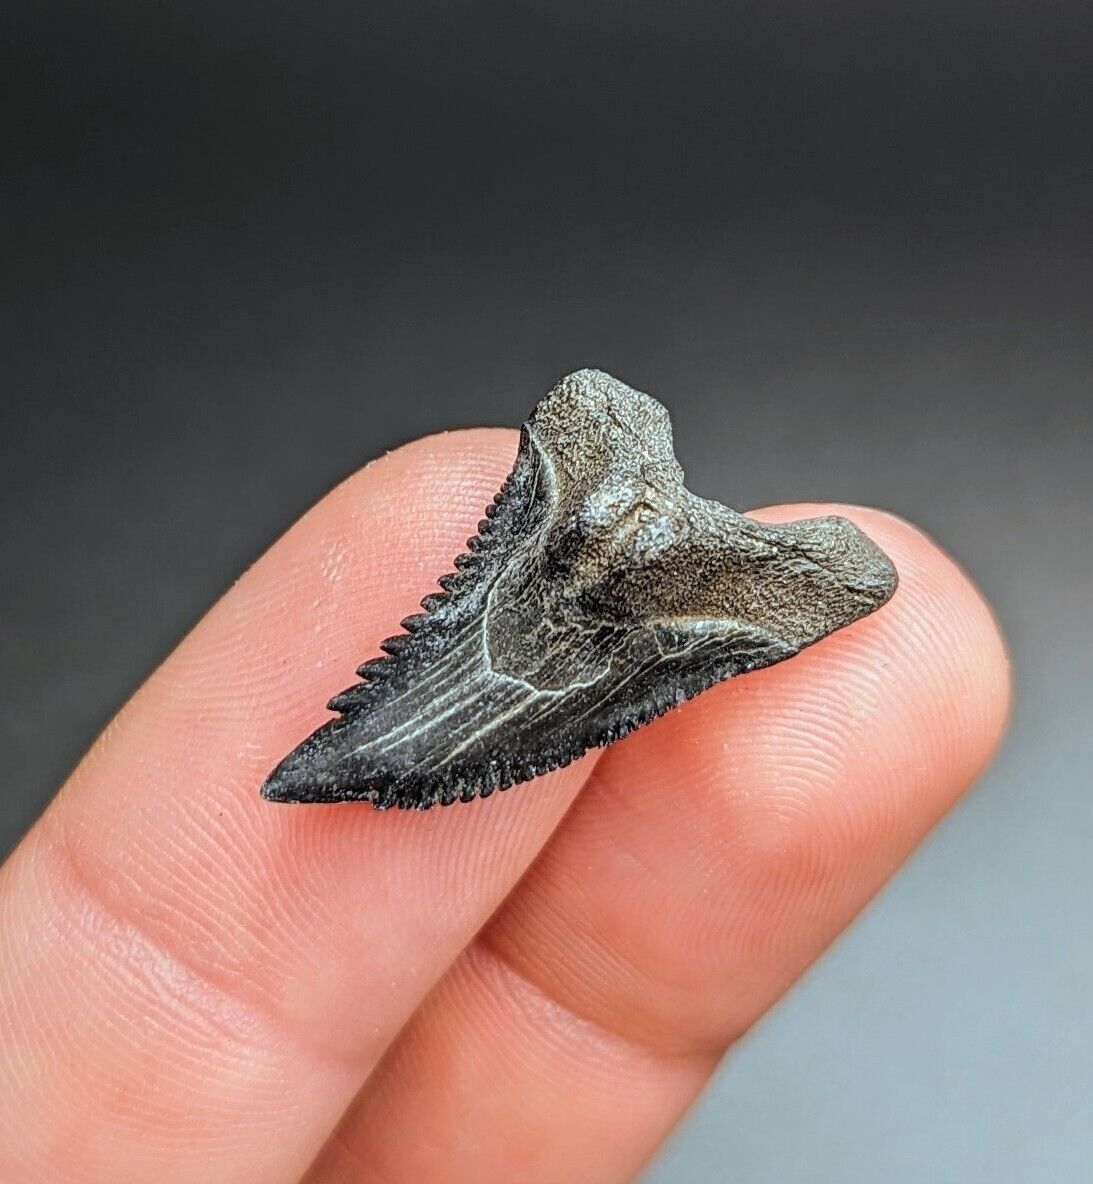 Gorgeous Sharply Serrated Snaggletooth Shark Tooth Peace River Florida